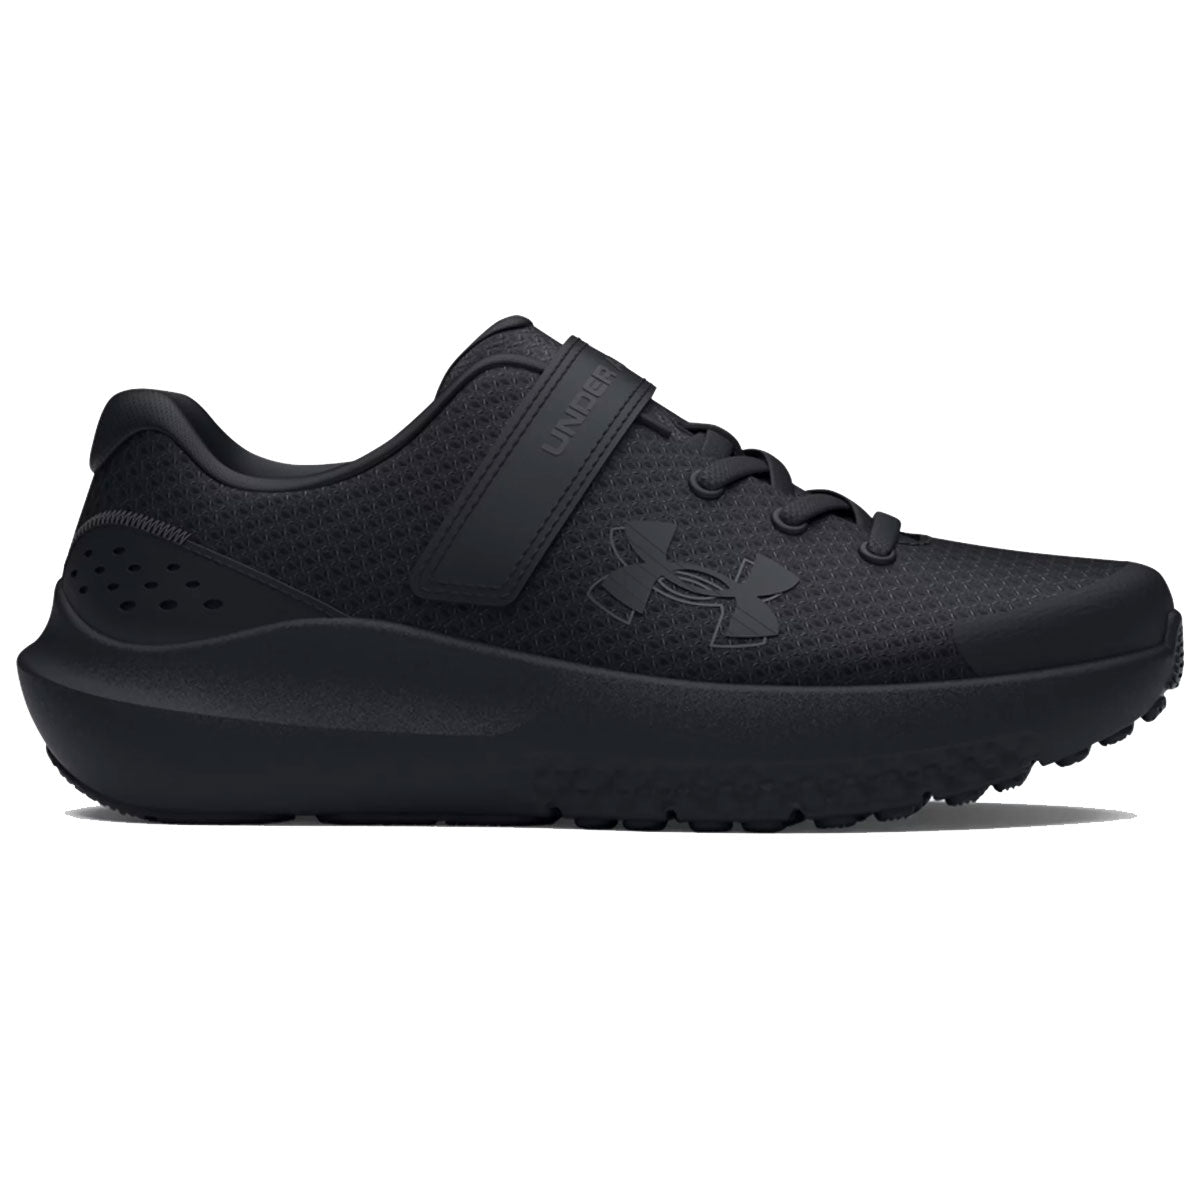 Under Armour BPS Surge 4 AC Running Shoes - Boys - Black